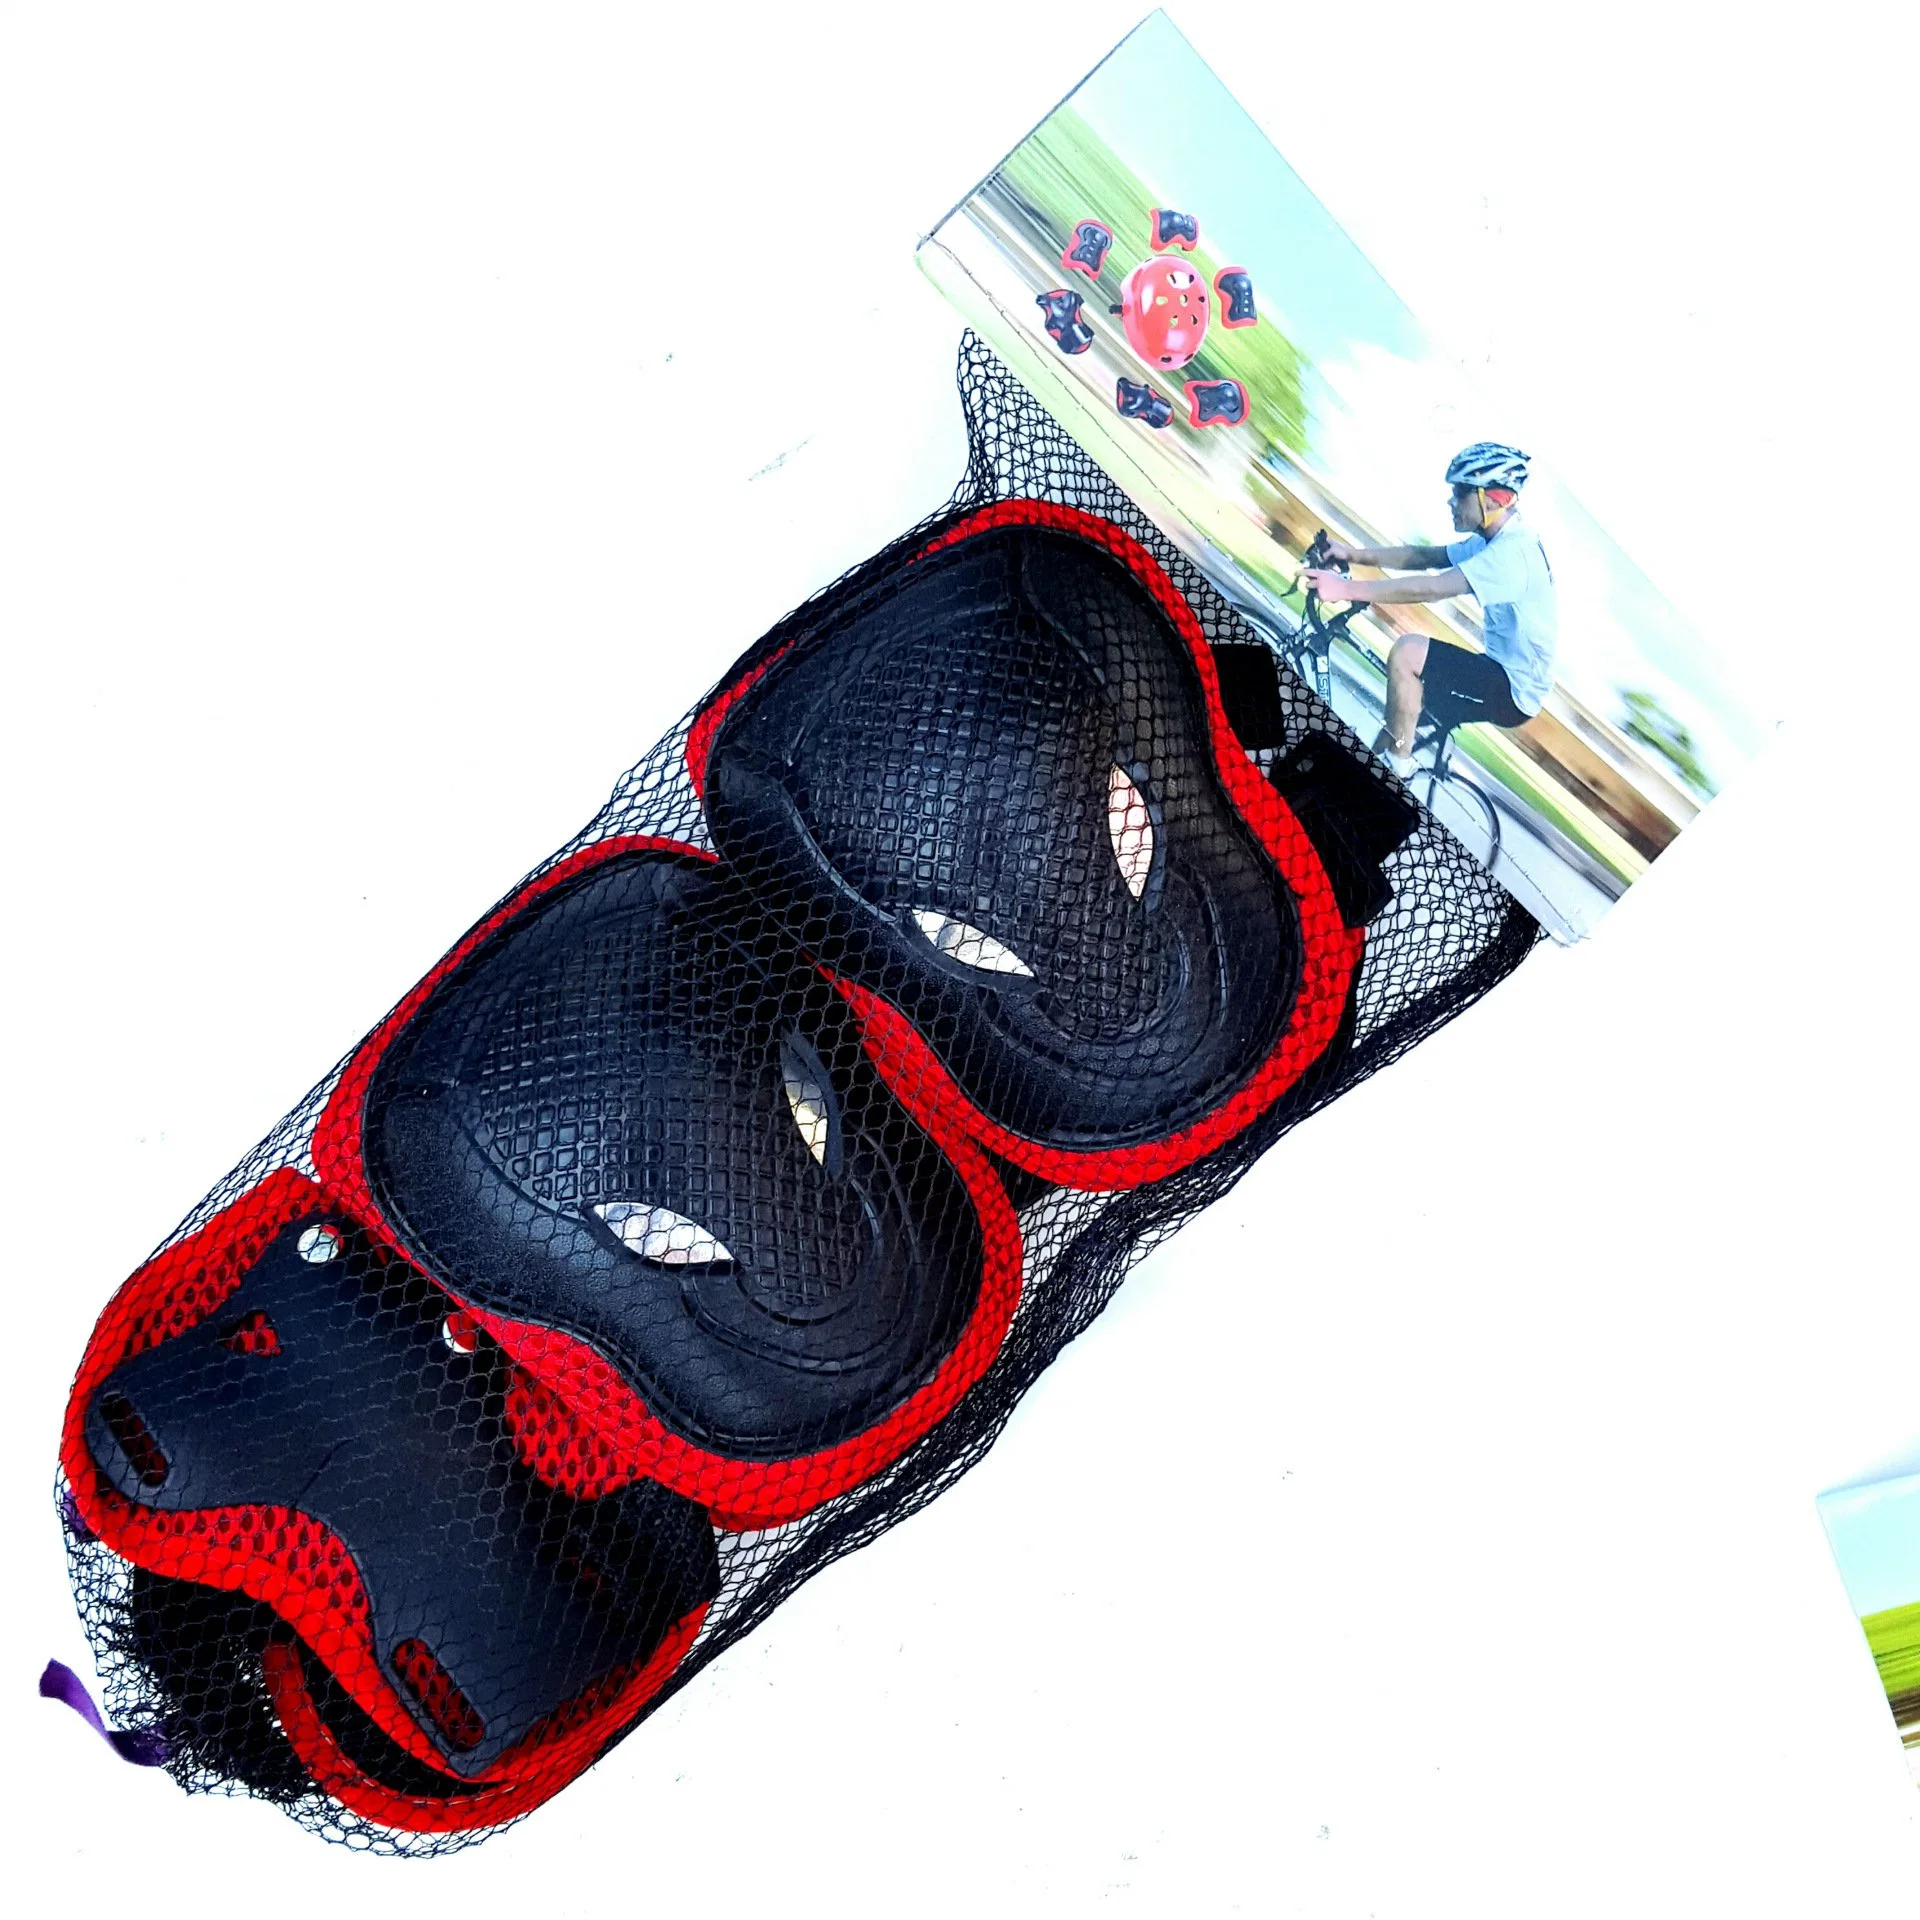 Kids Youth Adult Roller Skate Scooter Skateboard Bike Riding Protective Gear Knee Brace Pads and Elbow Pads Set